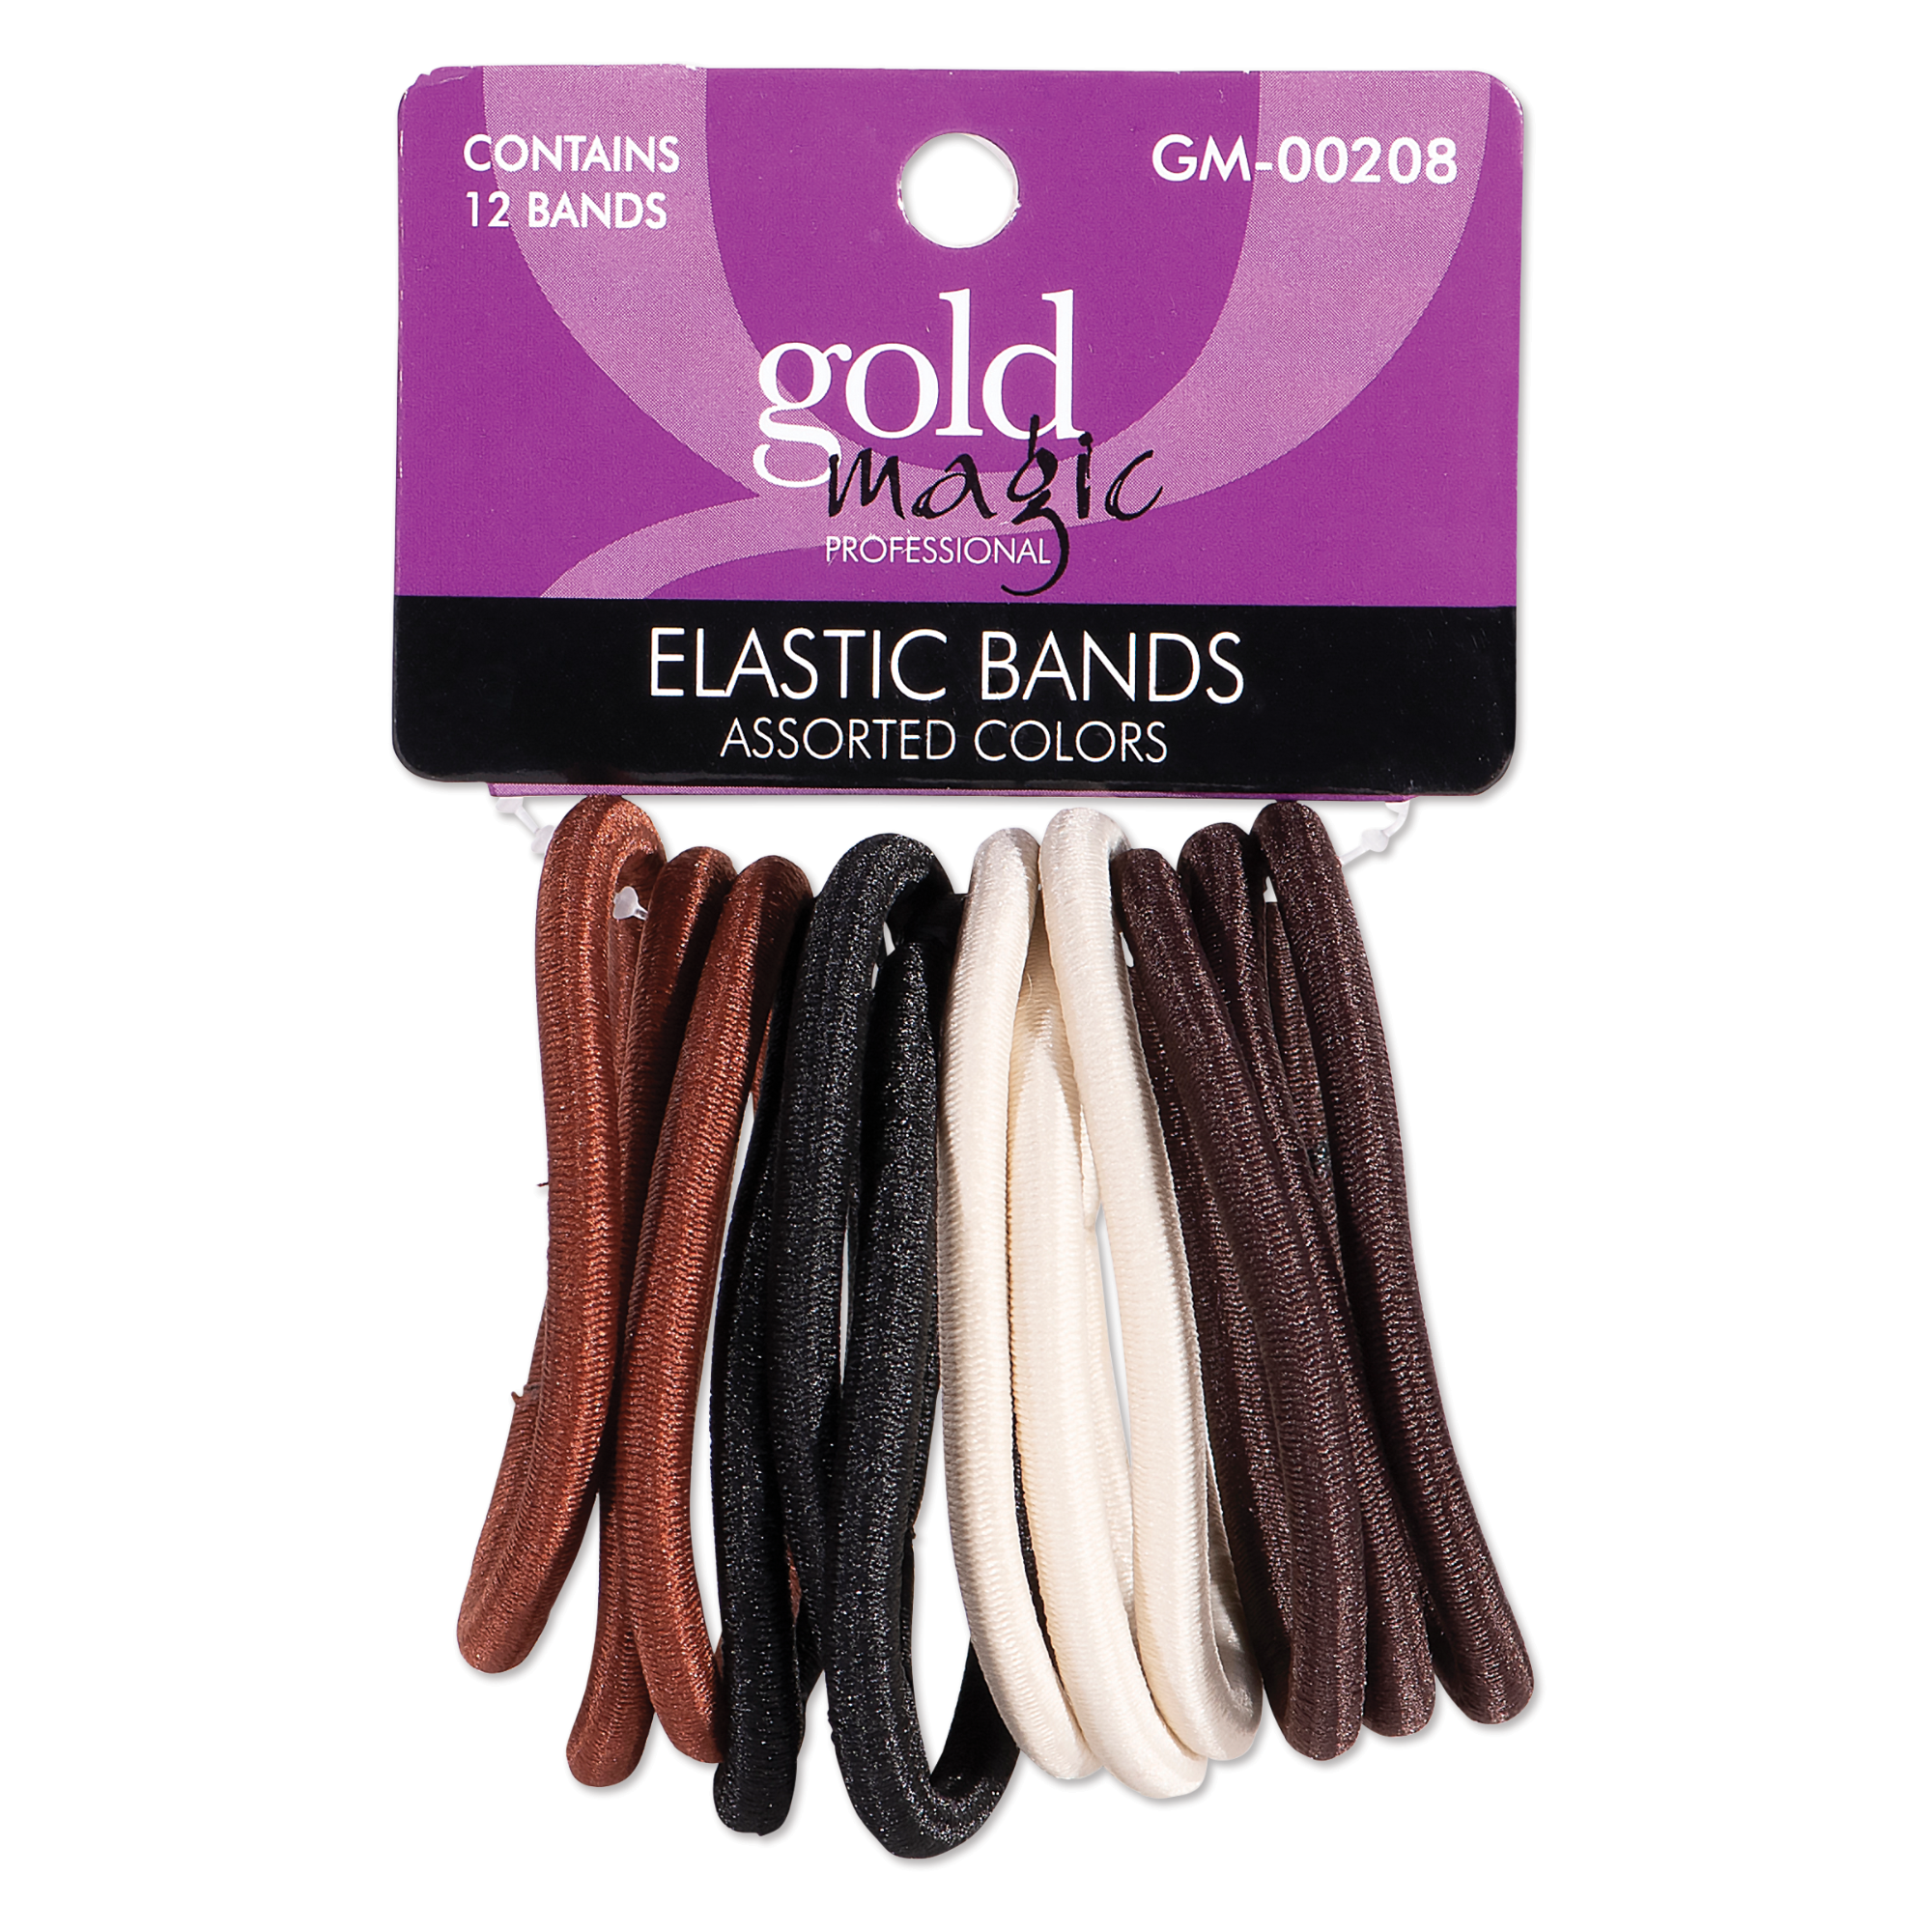 Elastic Bands In Assorted, Neutral Colors - 12 pk.